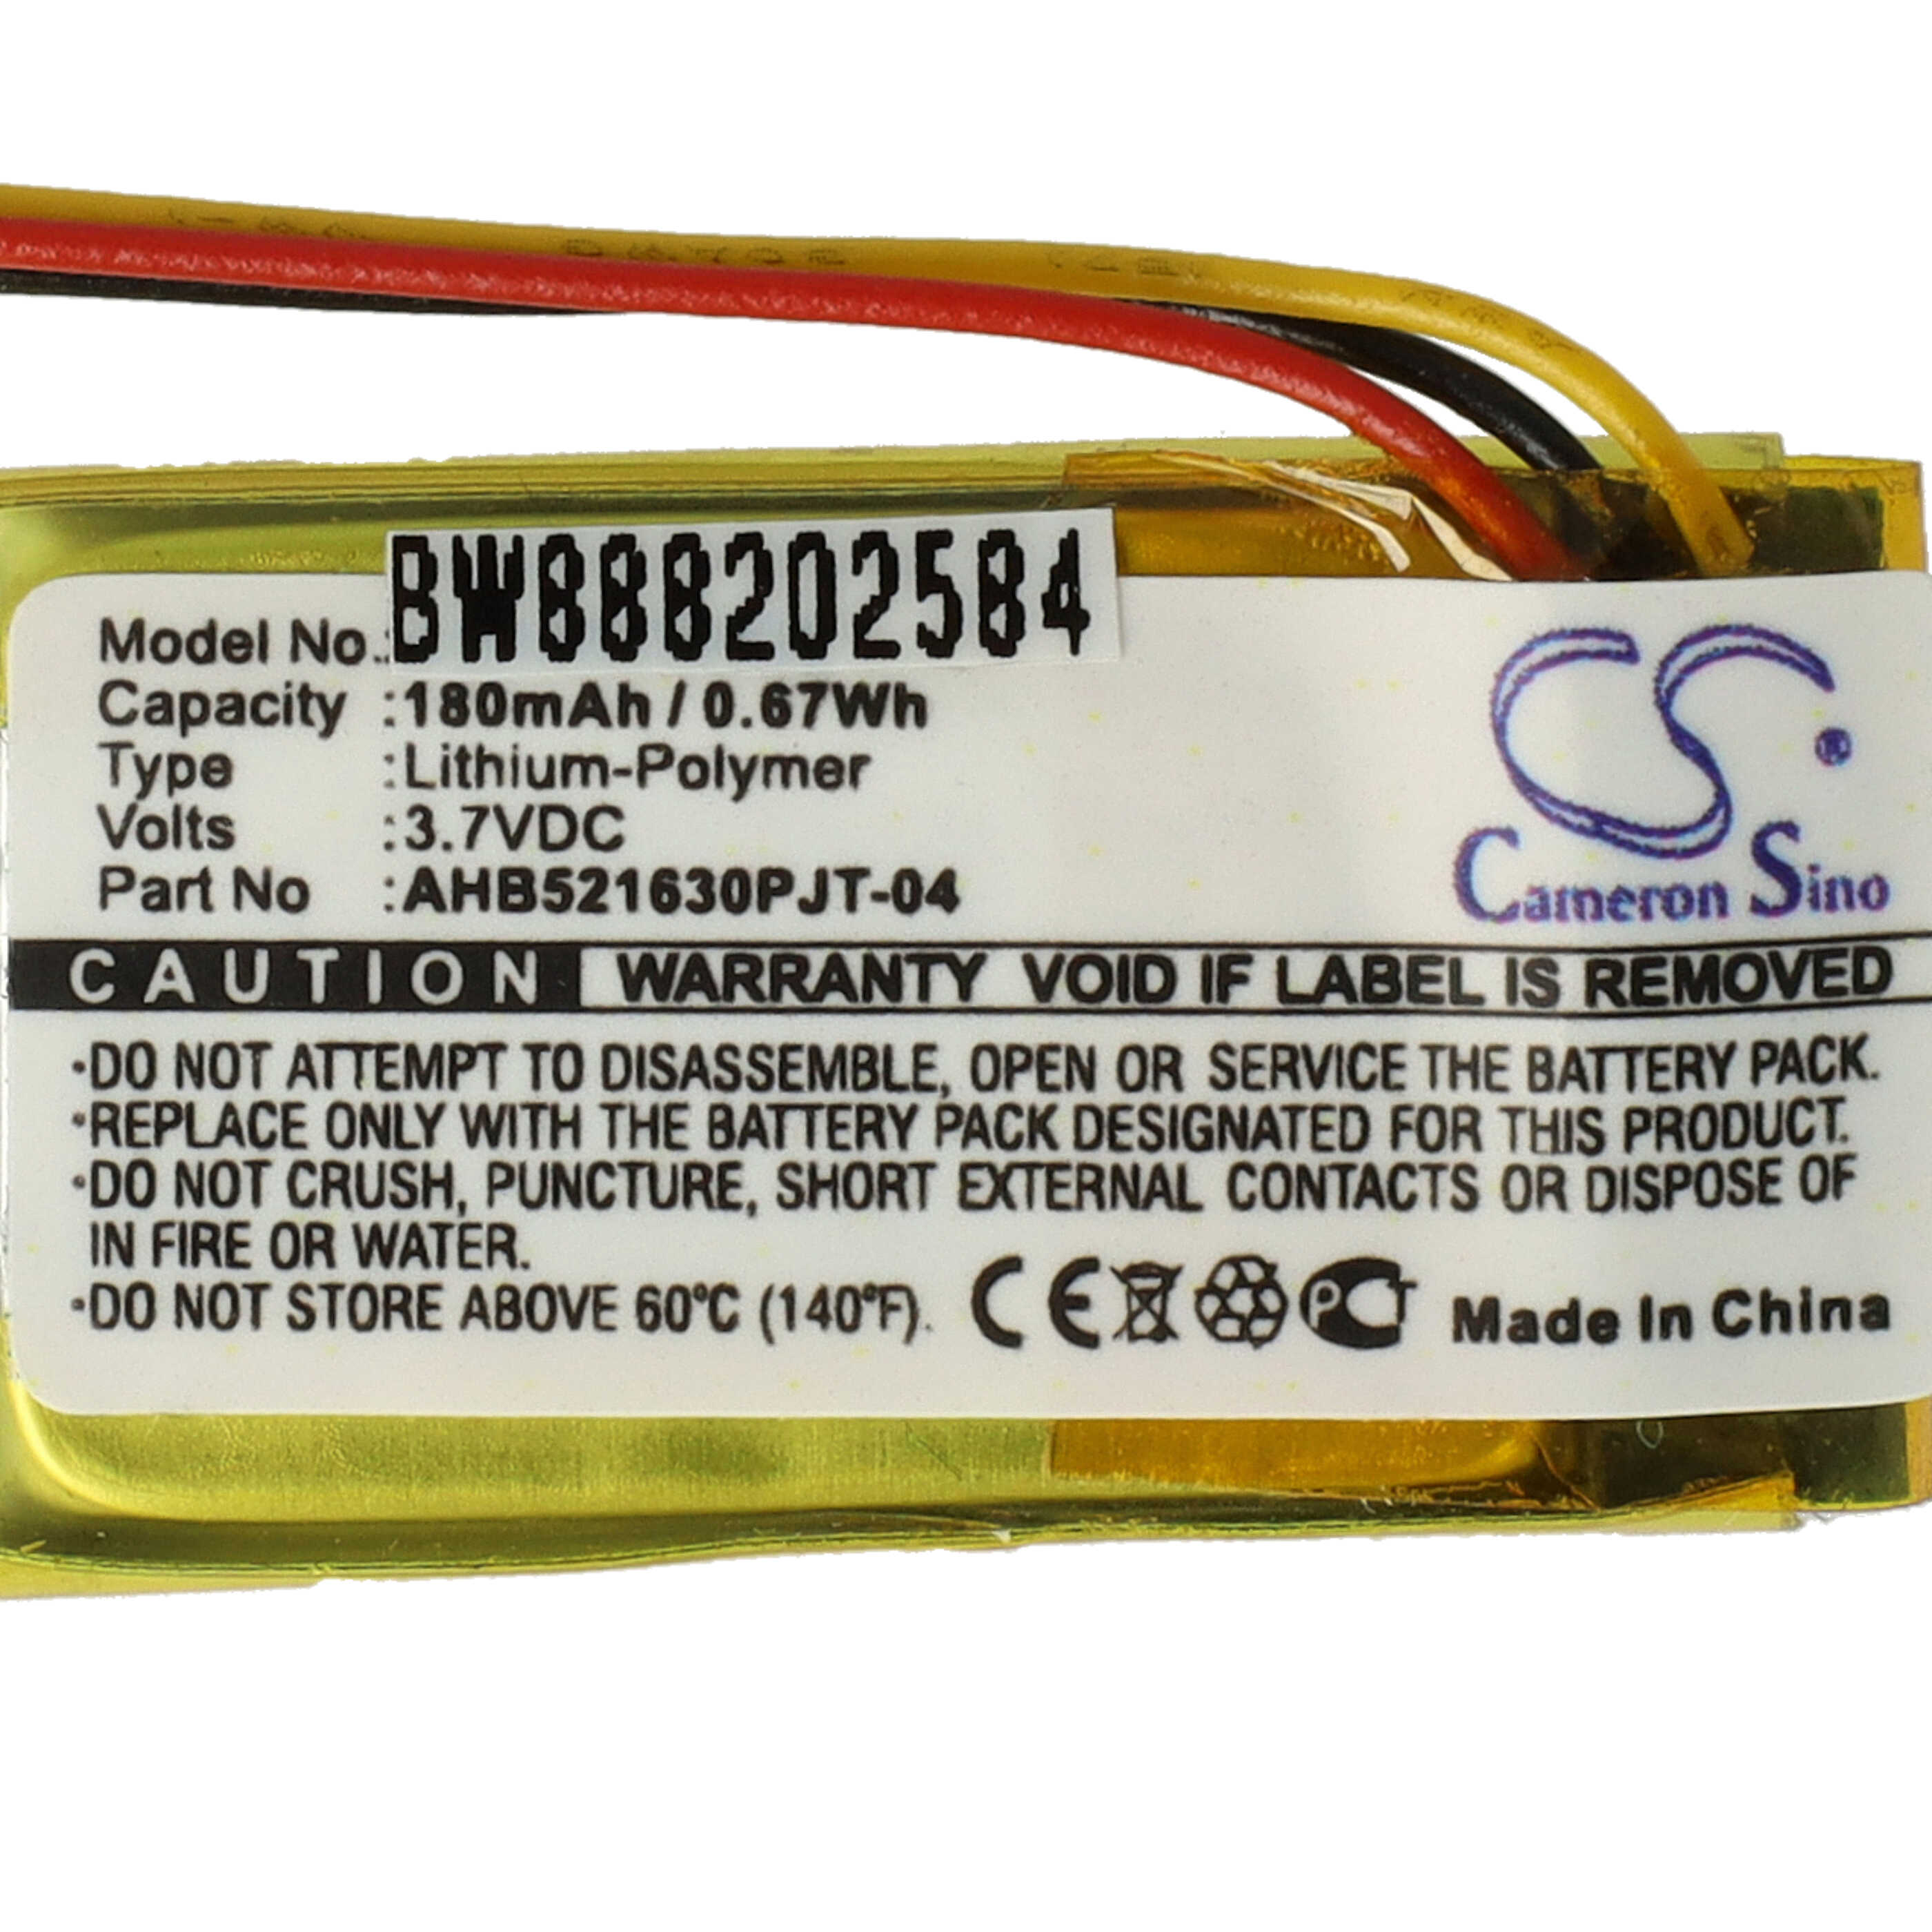 Computer Mouse Battery Replacement for Logitech 533-000151, AHB521630, 533-000069 - 180mAh 3.7V Li-polymer